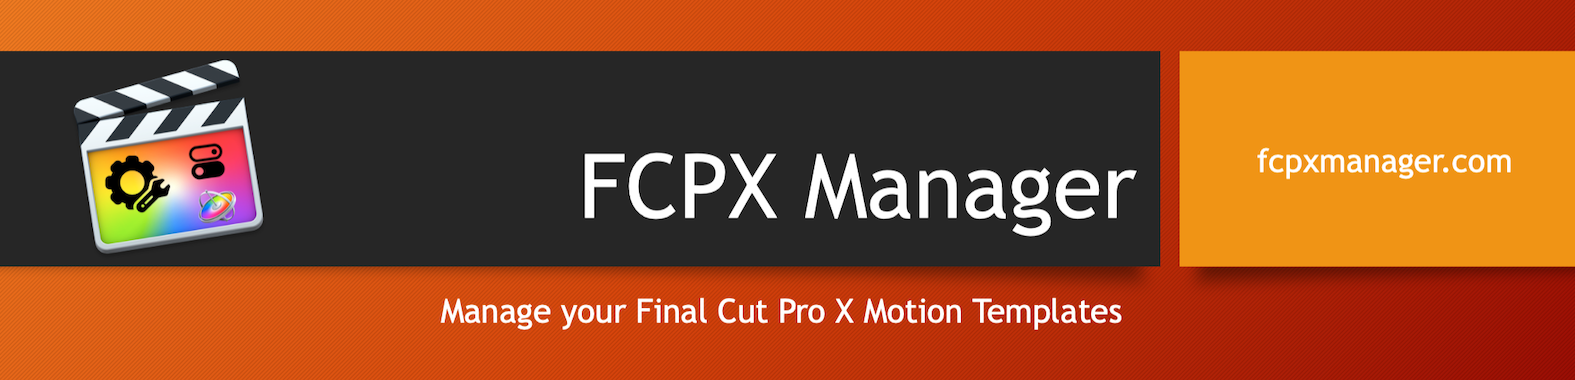 https://www.fcpxmanager.com/help.php